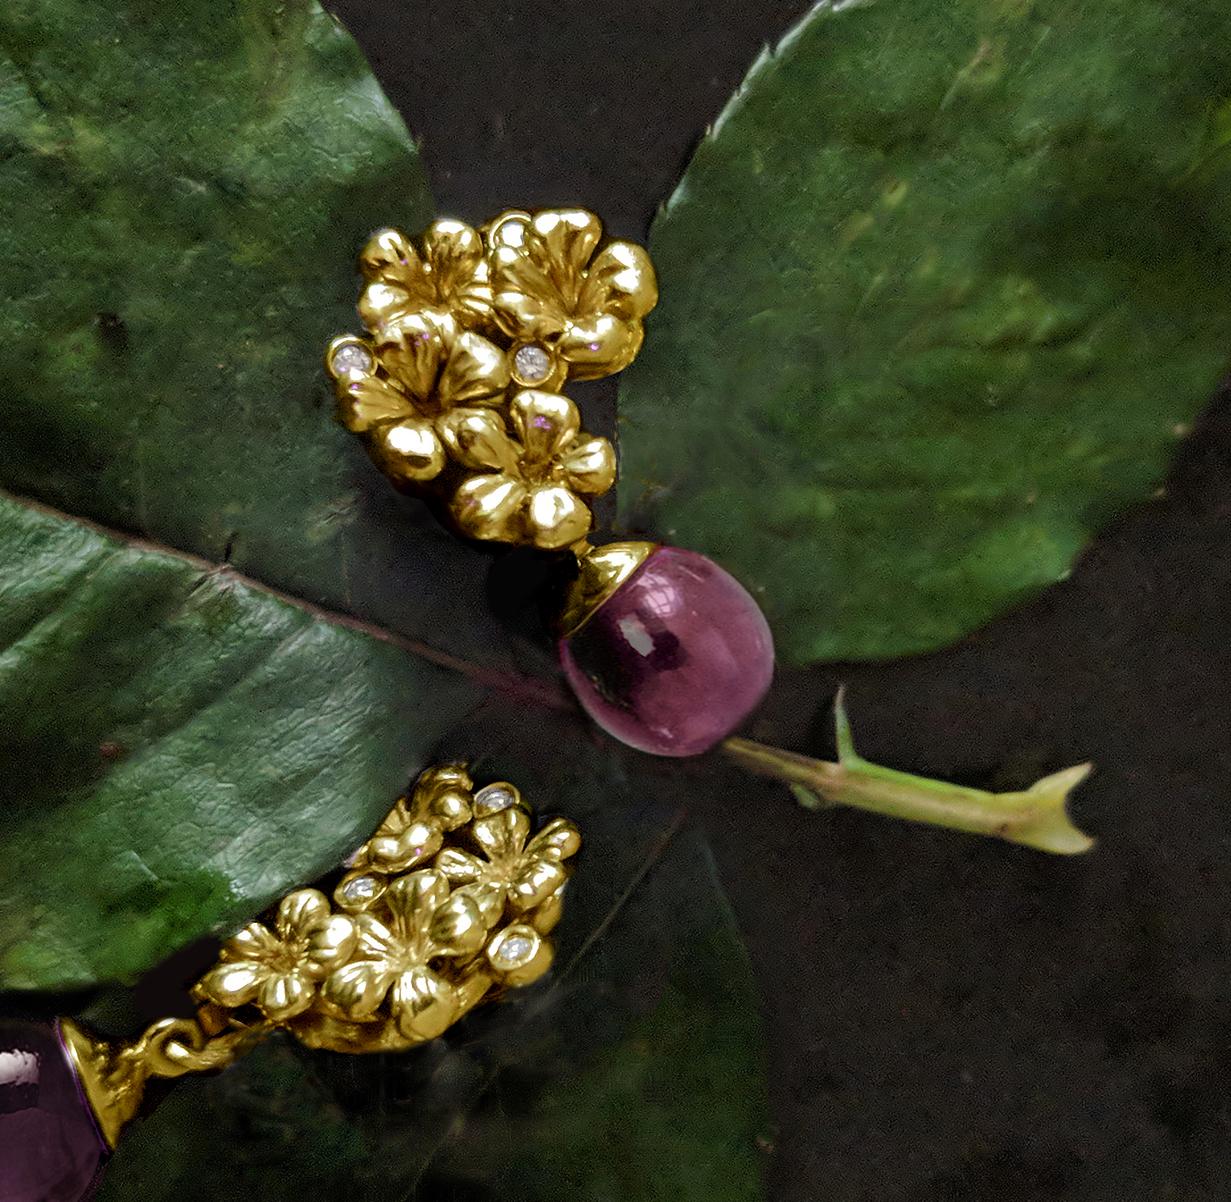 18 karat yellow gold Plum Blossom brooch with a removable rose quartz drop, encrusted with 3 round diamonds, is a contemporary jewellery piece that has been featured in Vogue UA reviews. The cabochon lemon quartz can be easily replaced with other